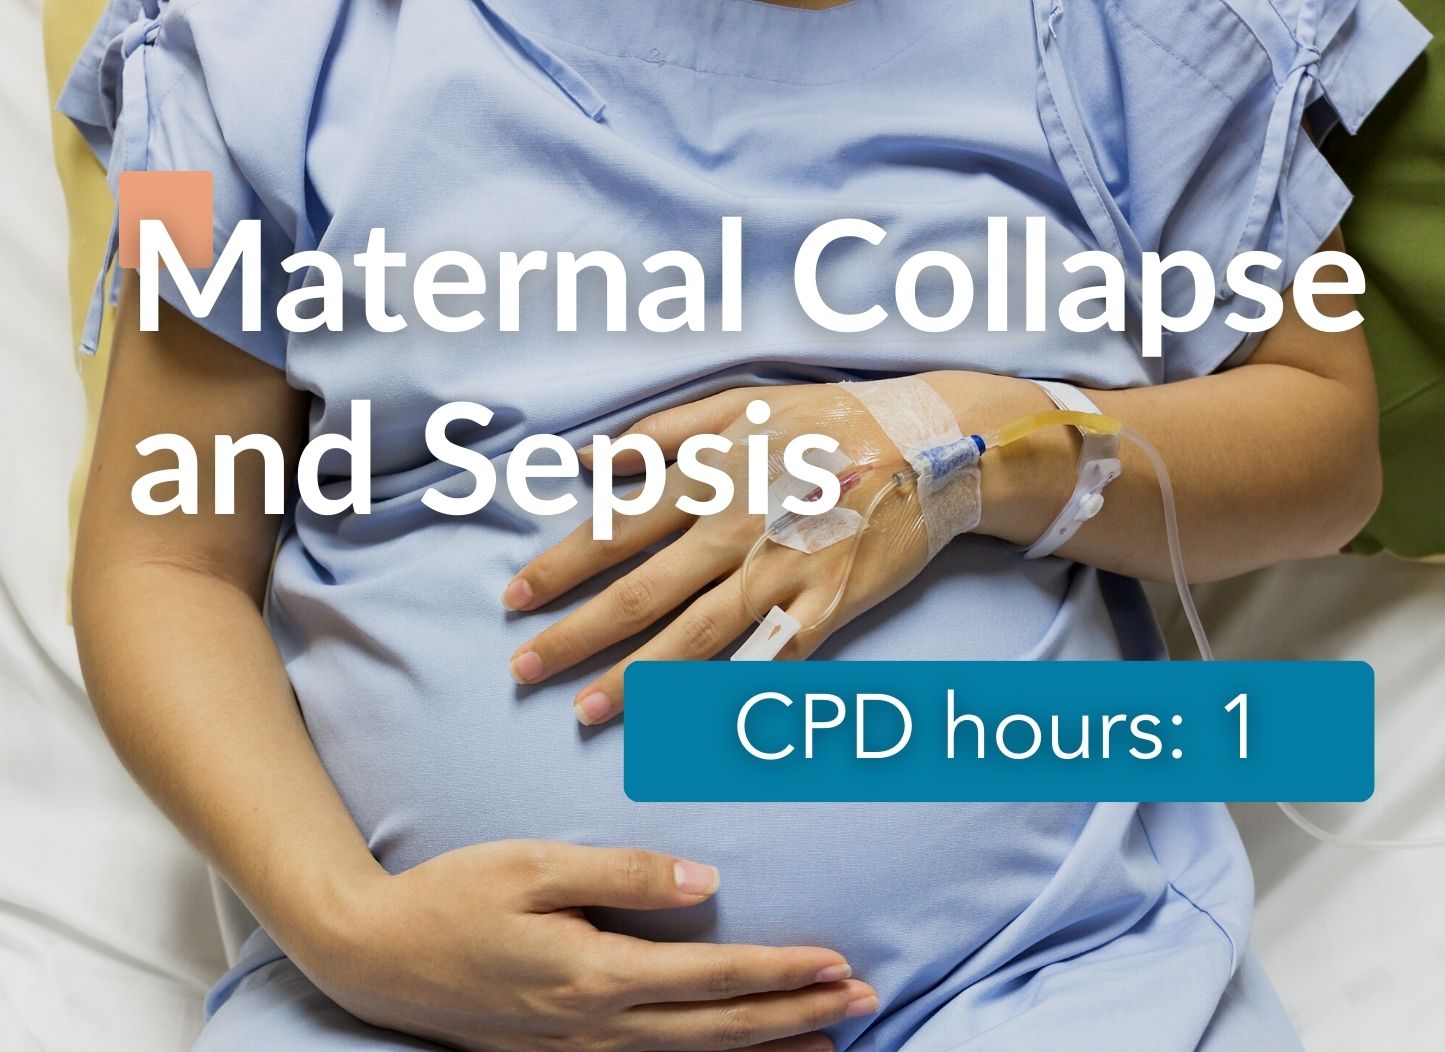 Maternal Collapse and Sepsis